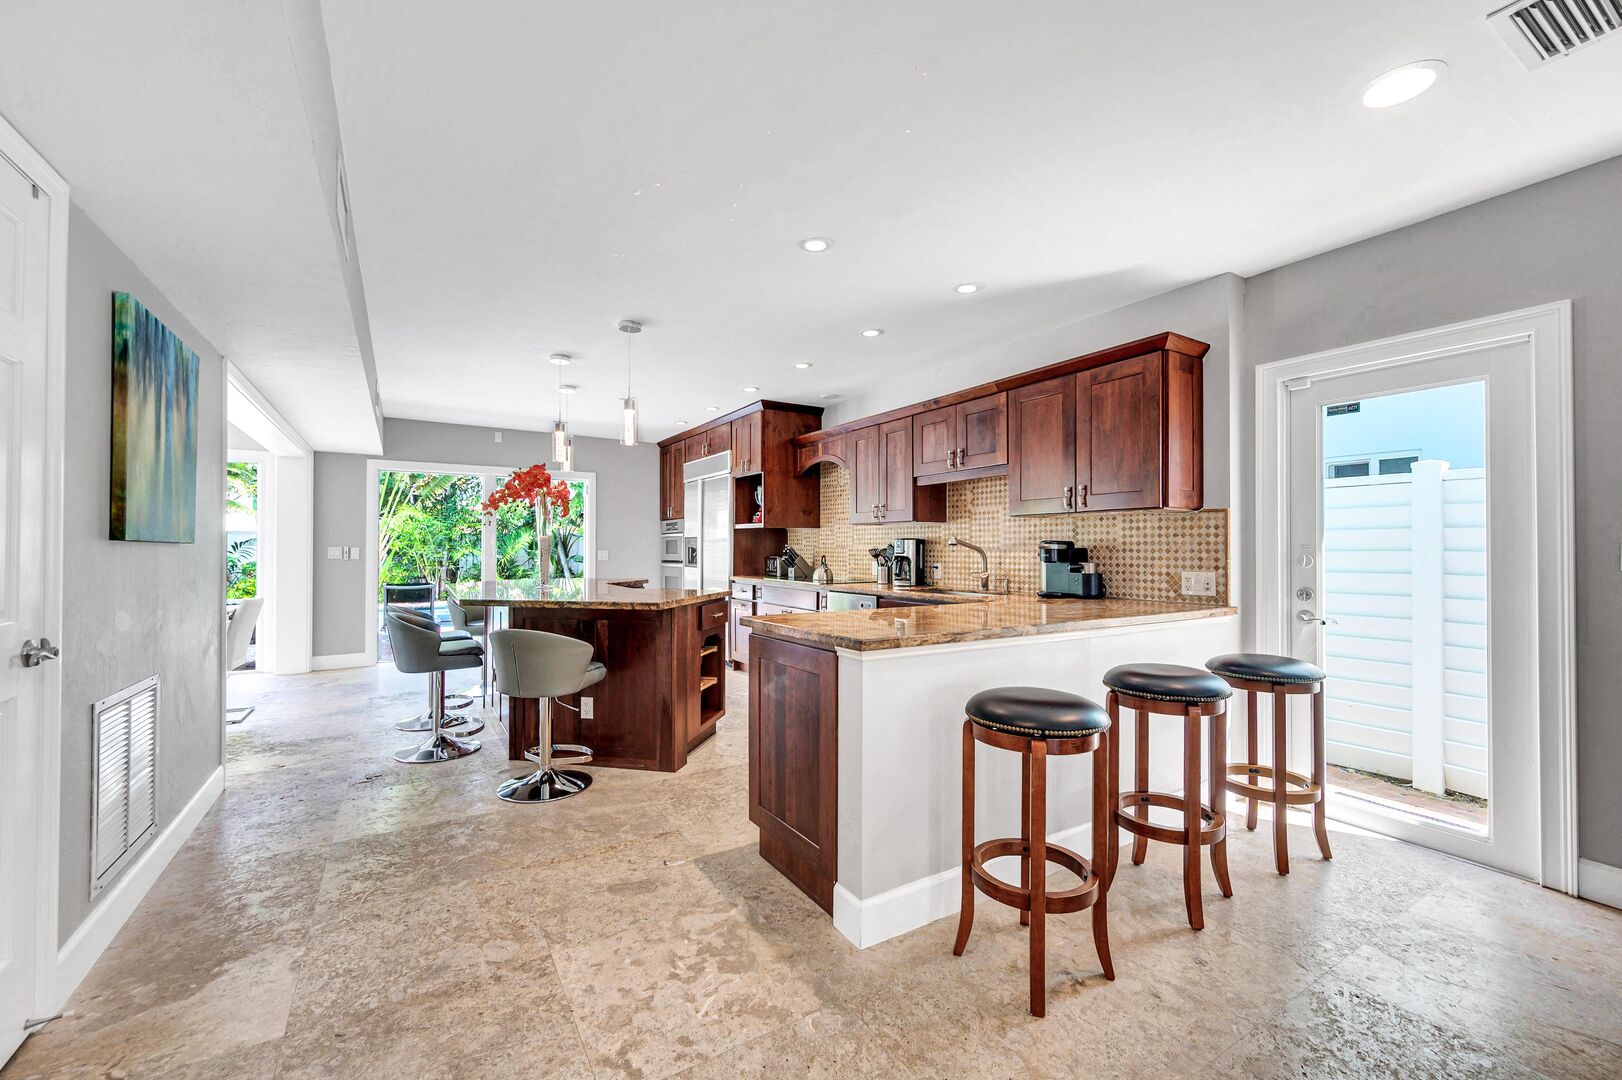 The kitchen comes with sleek countertops, modern appliances and bar seating for seven people.